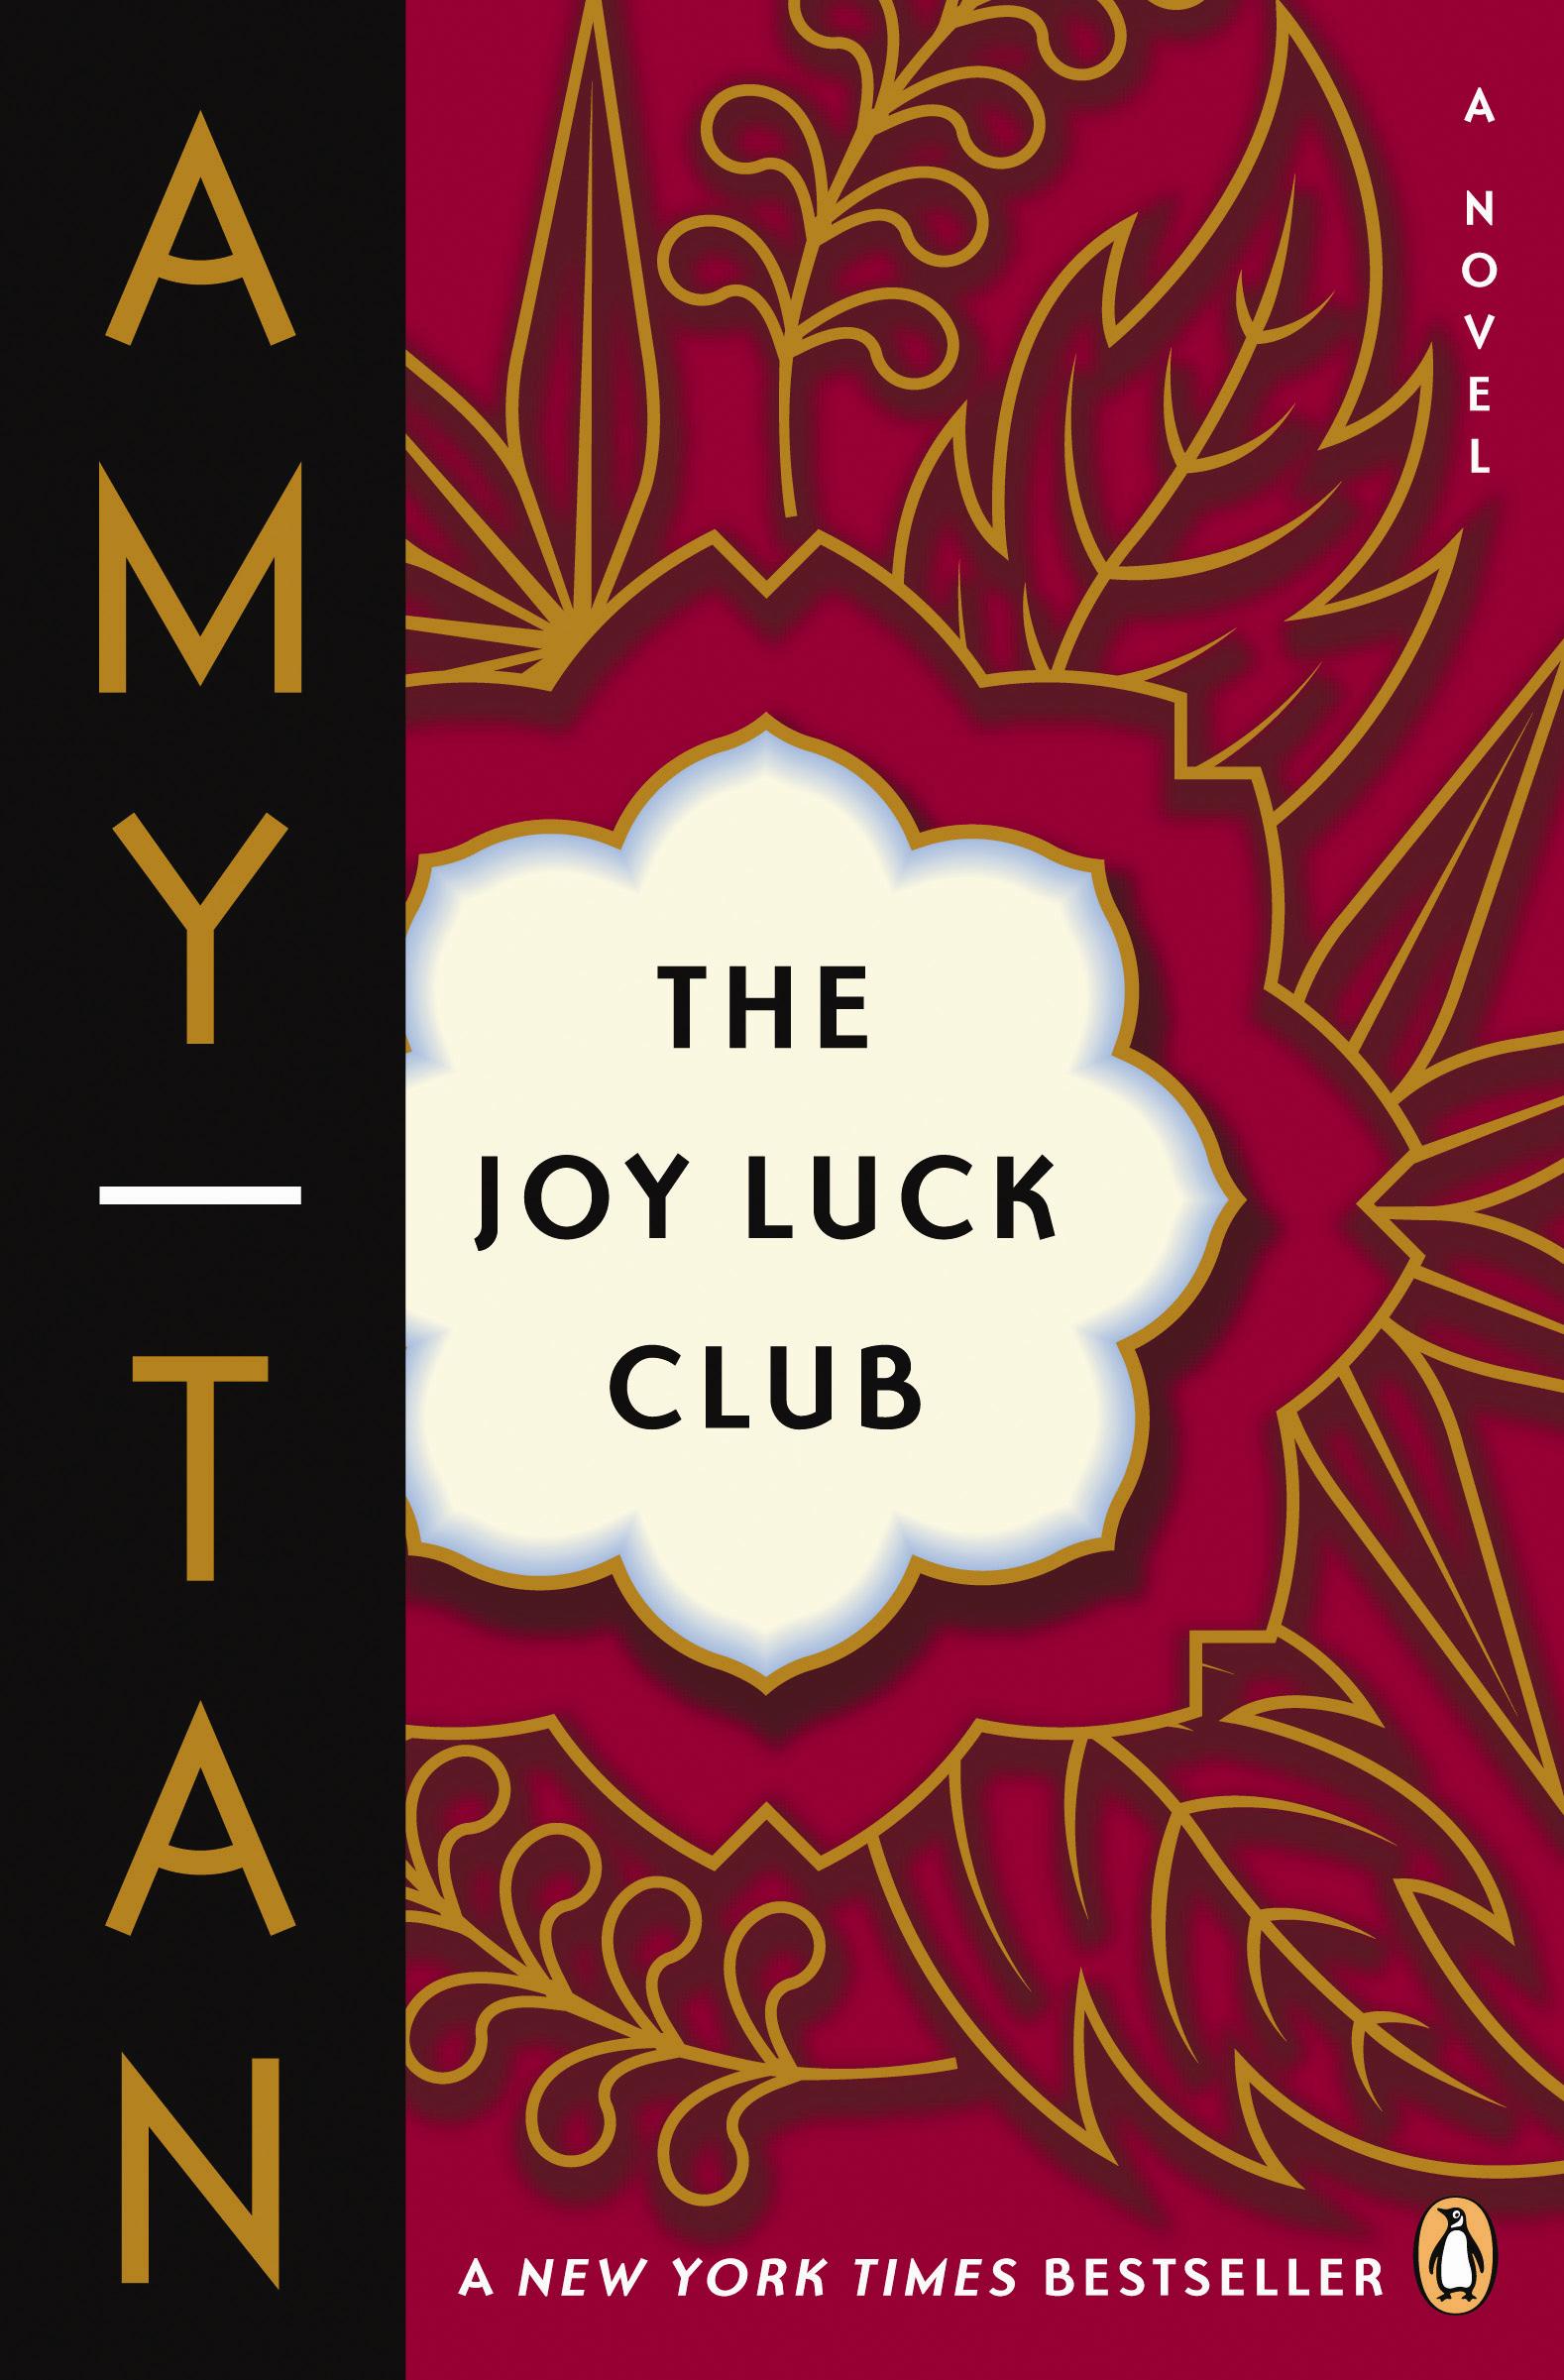 The Joy Luck Club book cover